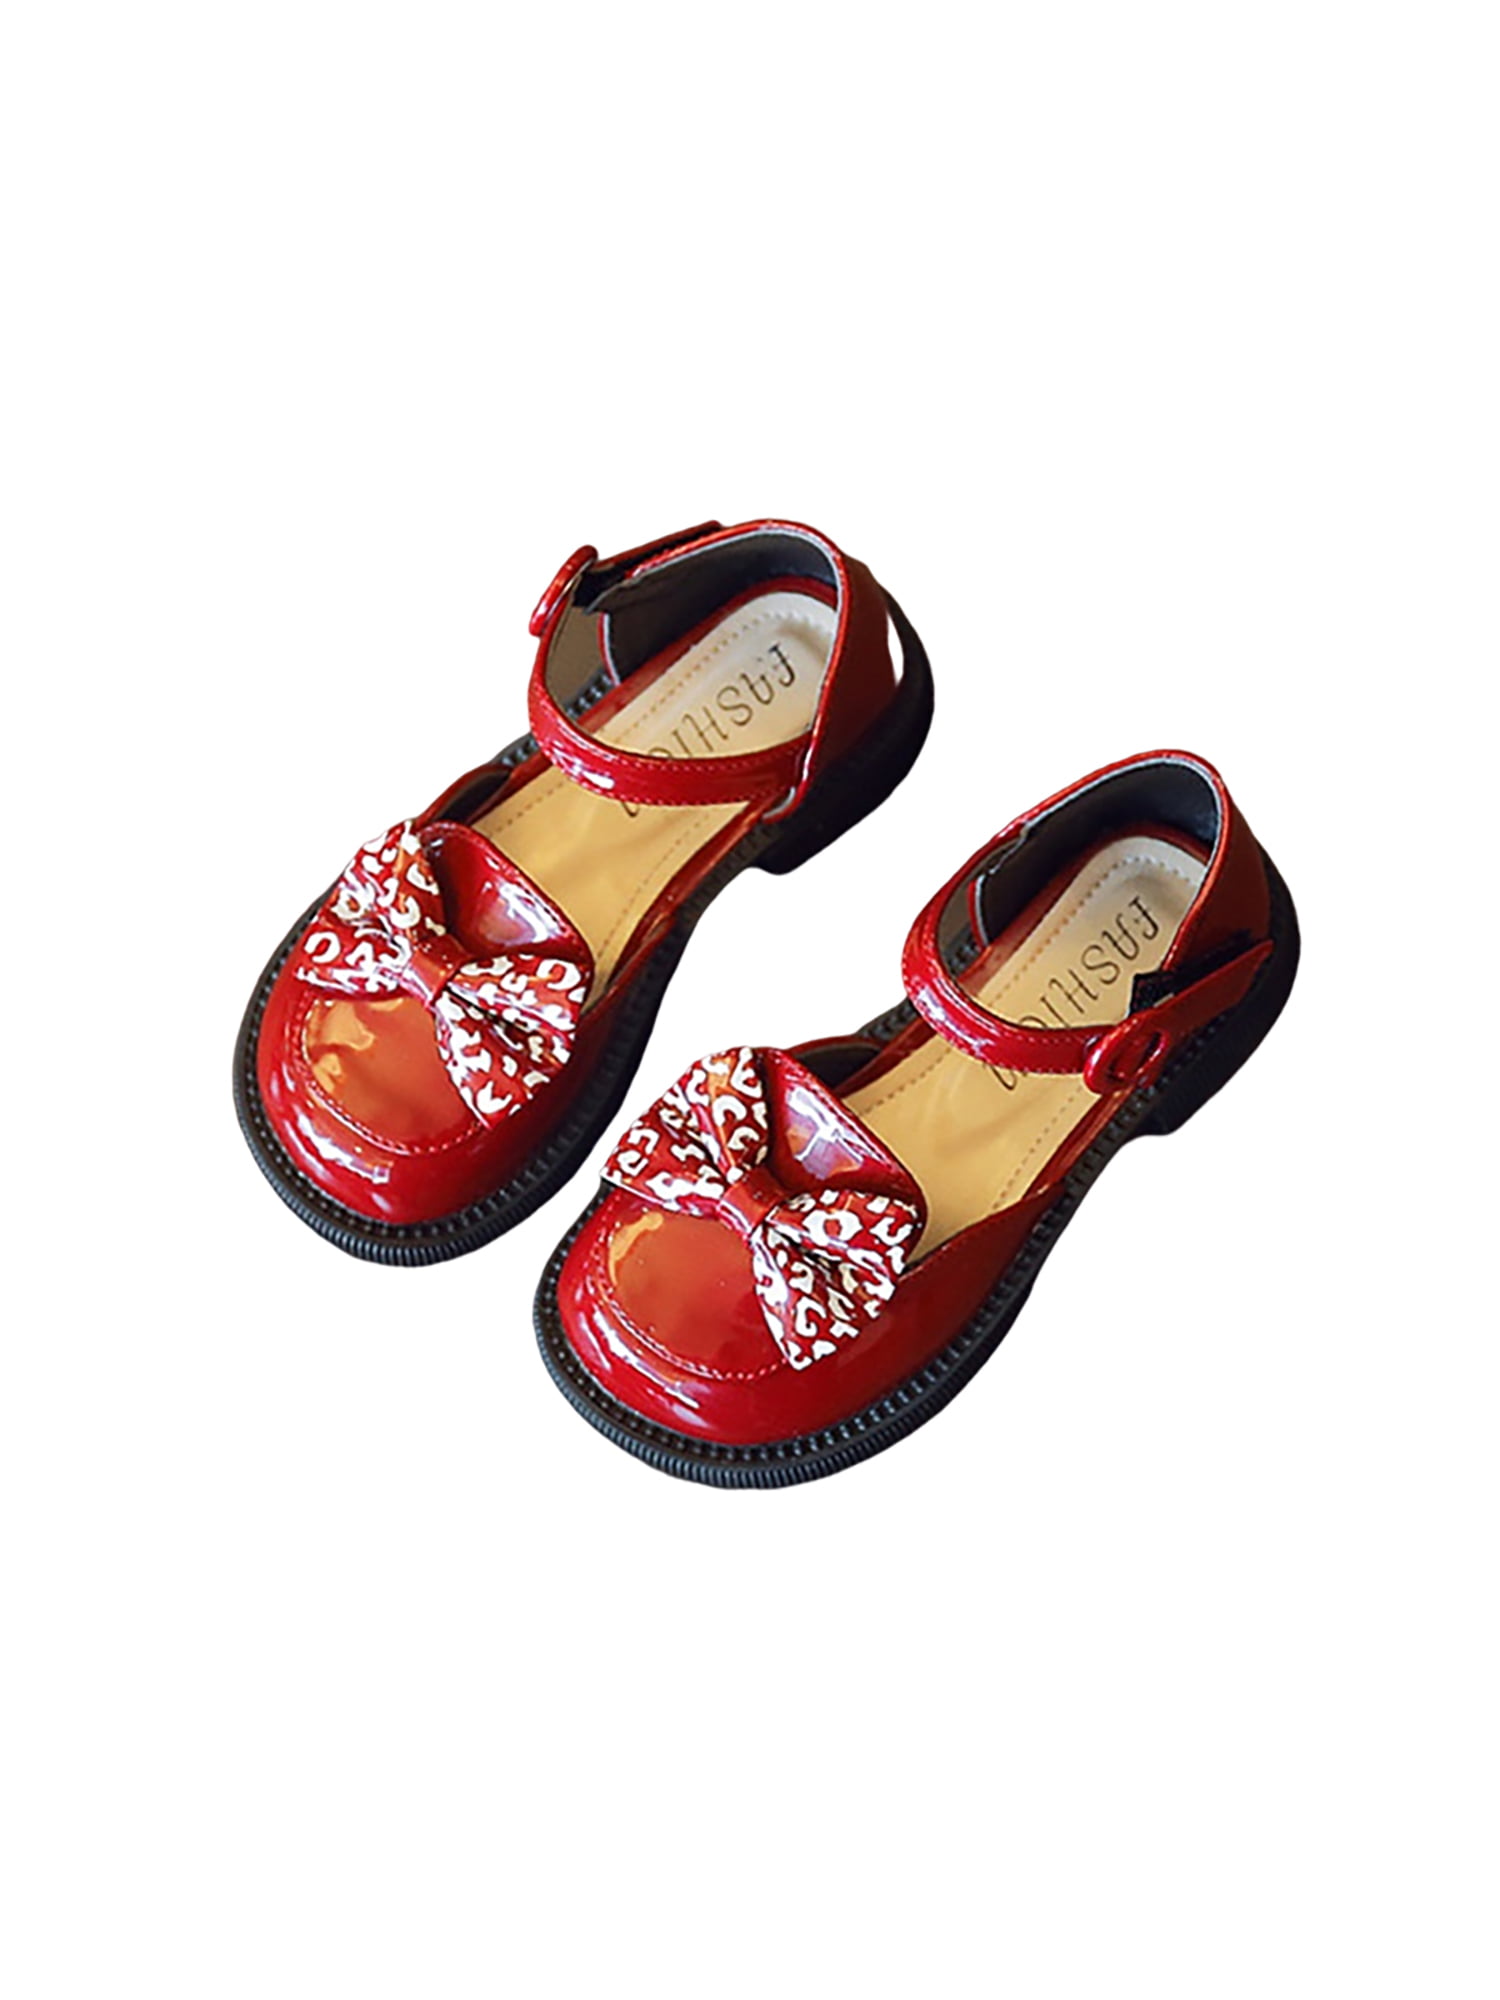 Kids Flats Toddler Girl Mary Jane Black/Red Shoes School Shoes Dress Shoes 